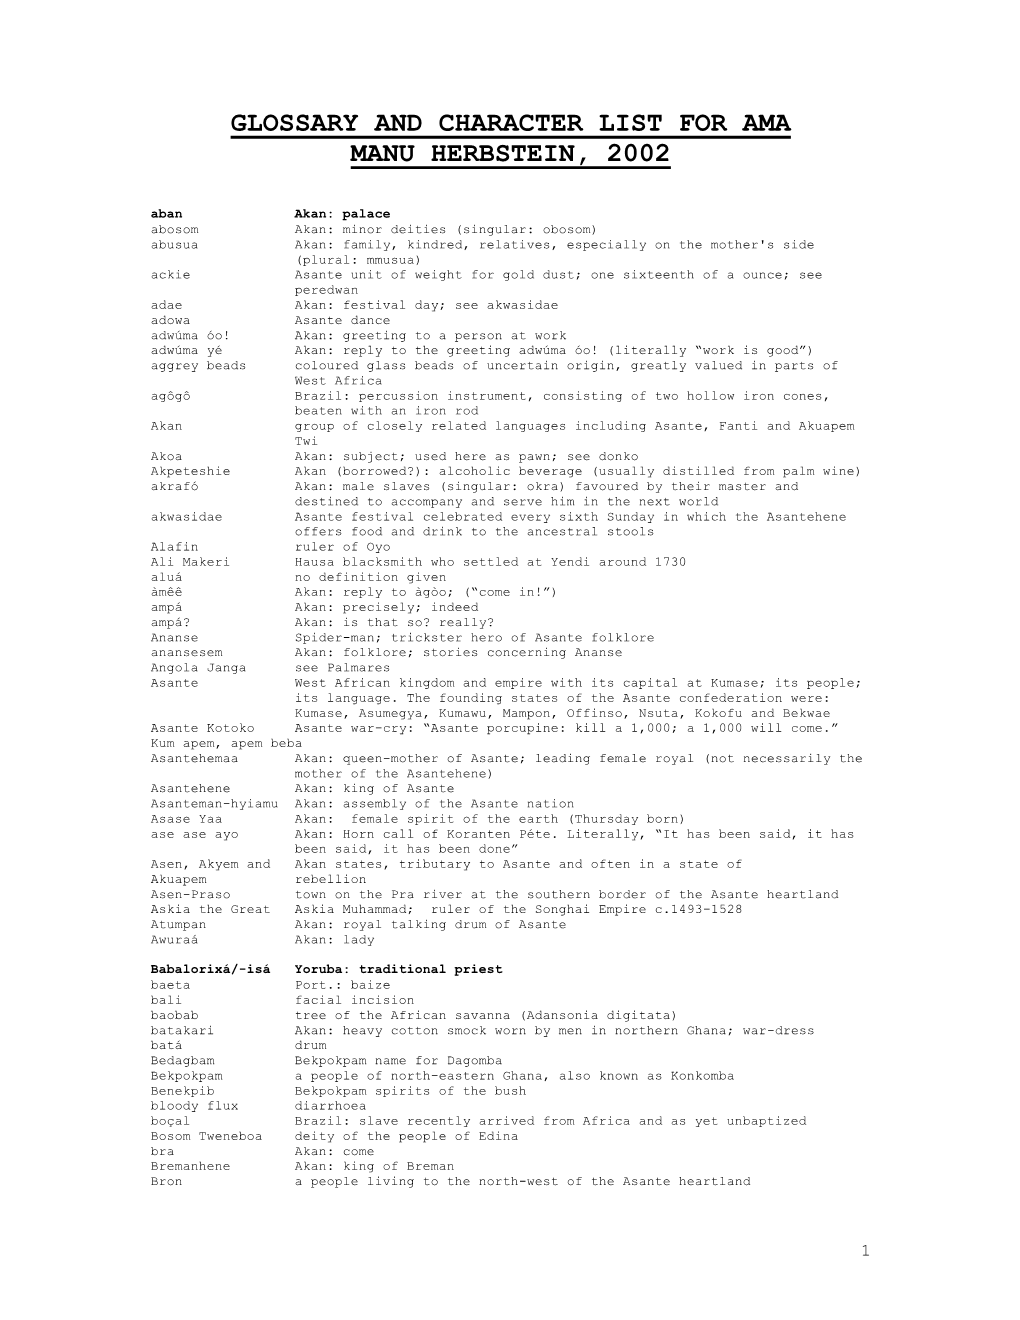 Glossary for Ama, Compiled and Placed Online by Manu Herstein, 2002